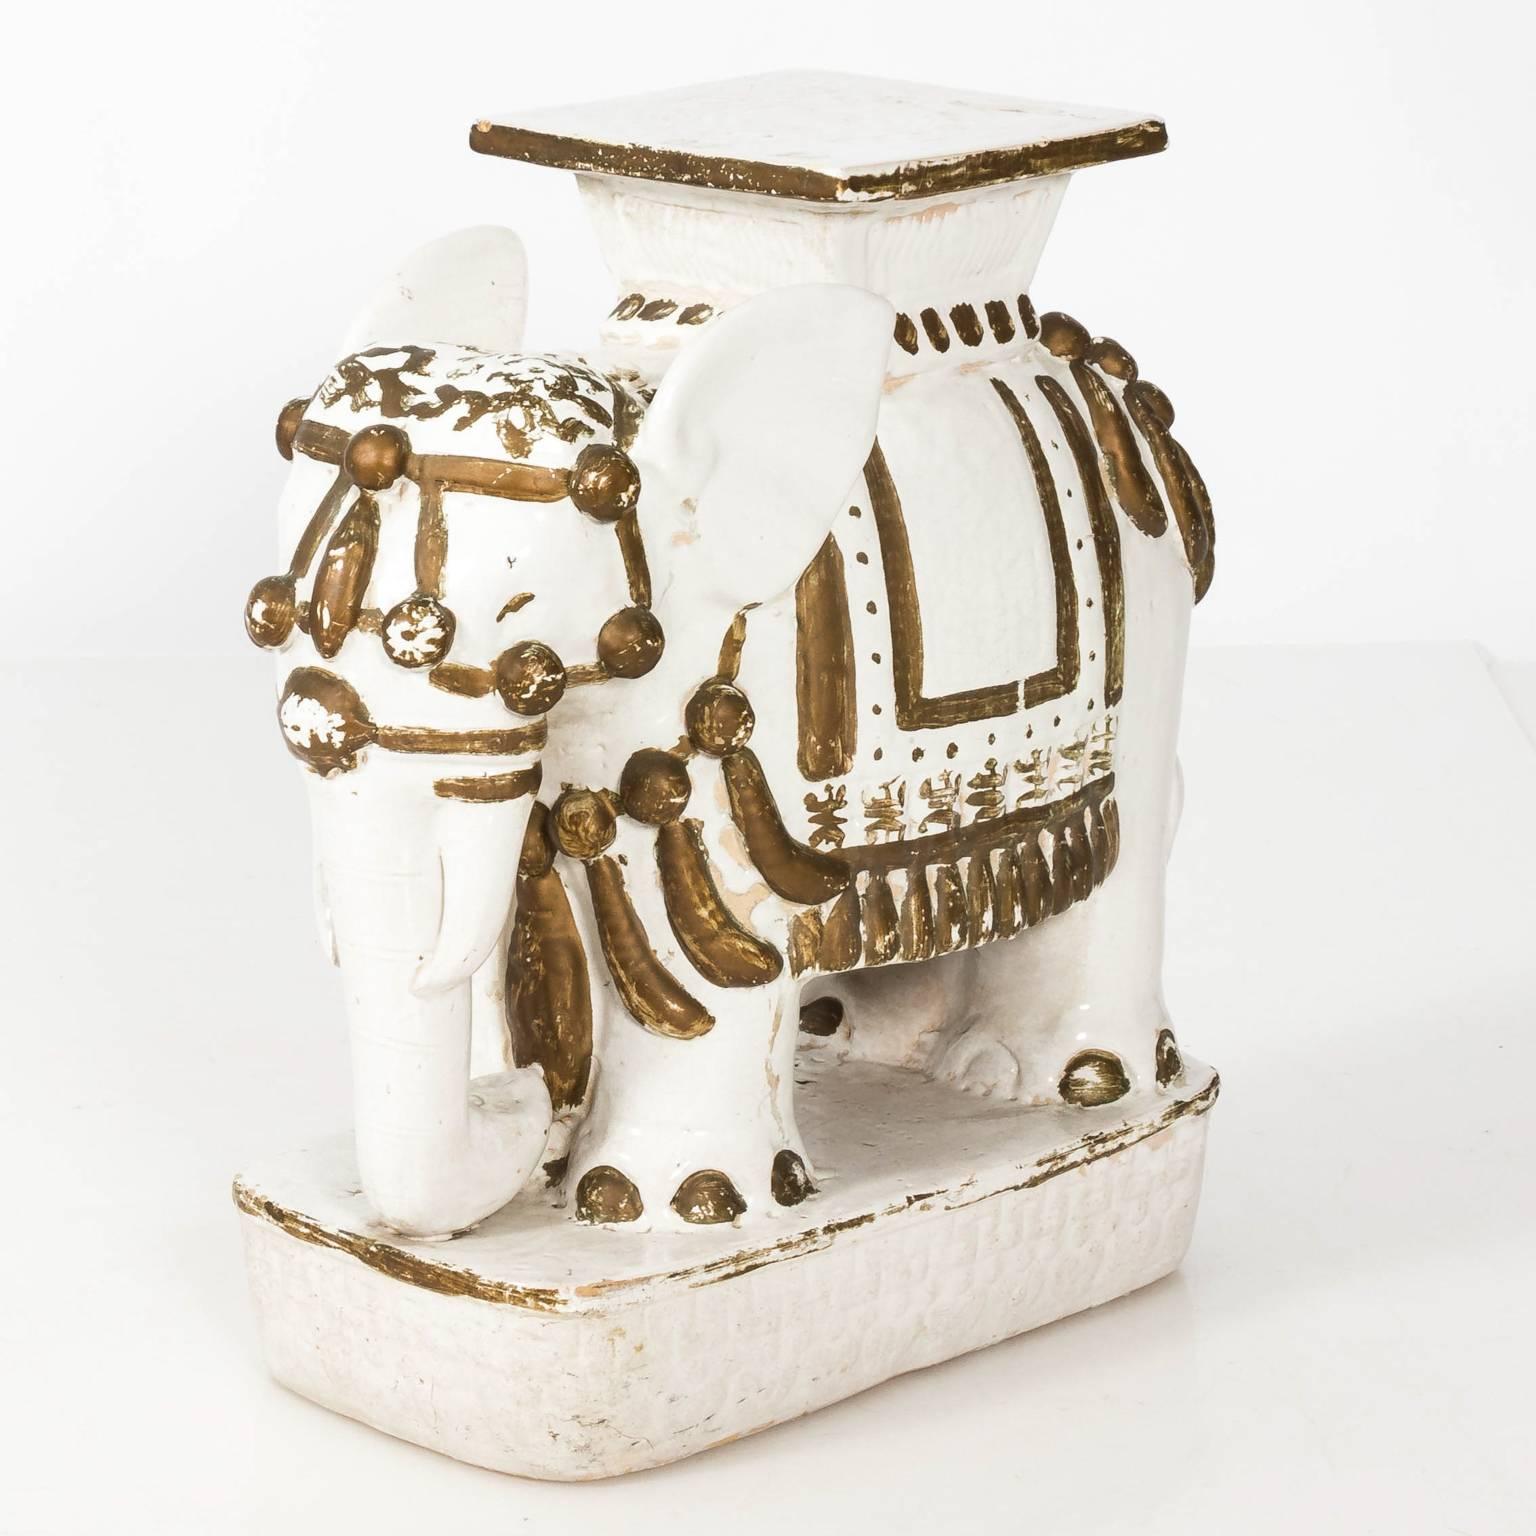 Set of two white painted ceramic elephant garden stools with painted gold highlights, circa mid-20th century.